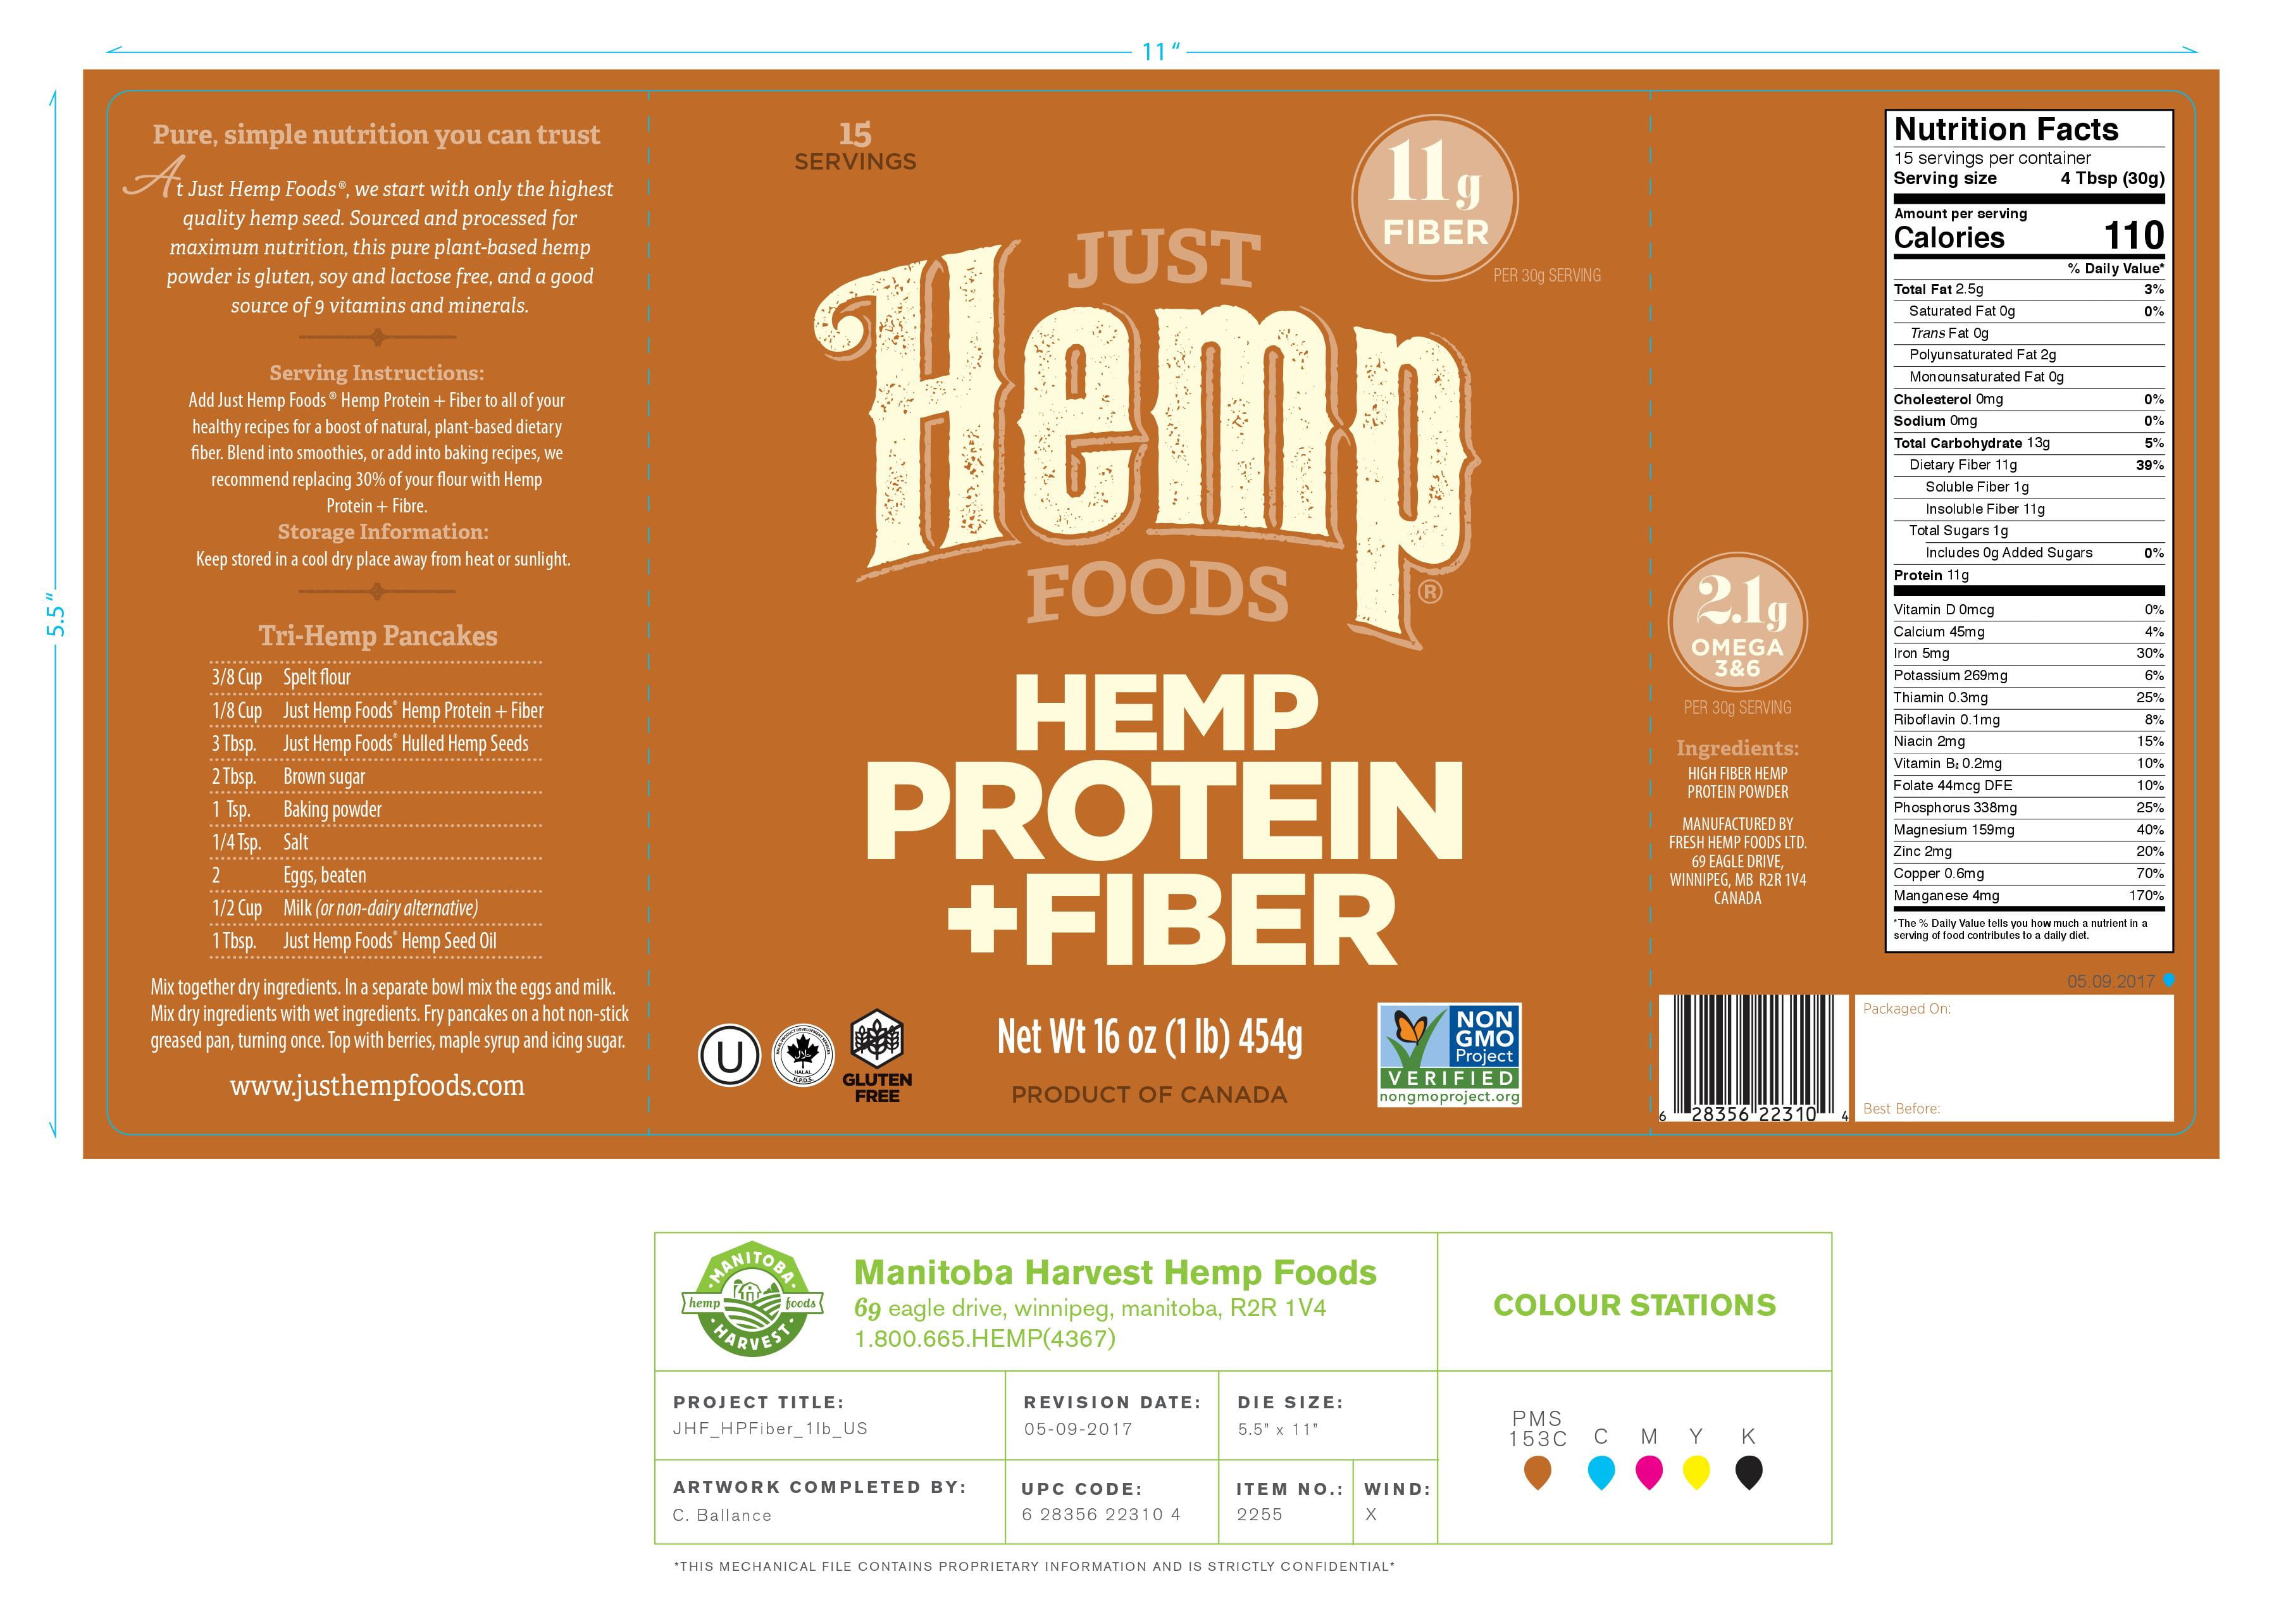 Just Hemp Foods Hemp Protein Powder Plus Fiber, Non-GMO Verified with 11g of Protein & 11g of Fiber per Serving, 16 oz - Packaging May Vary